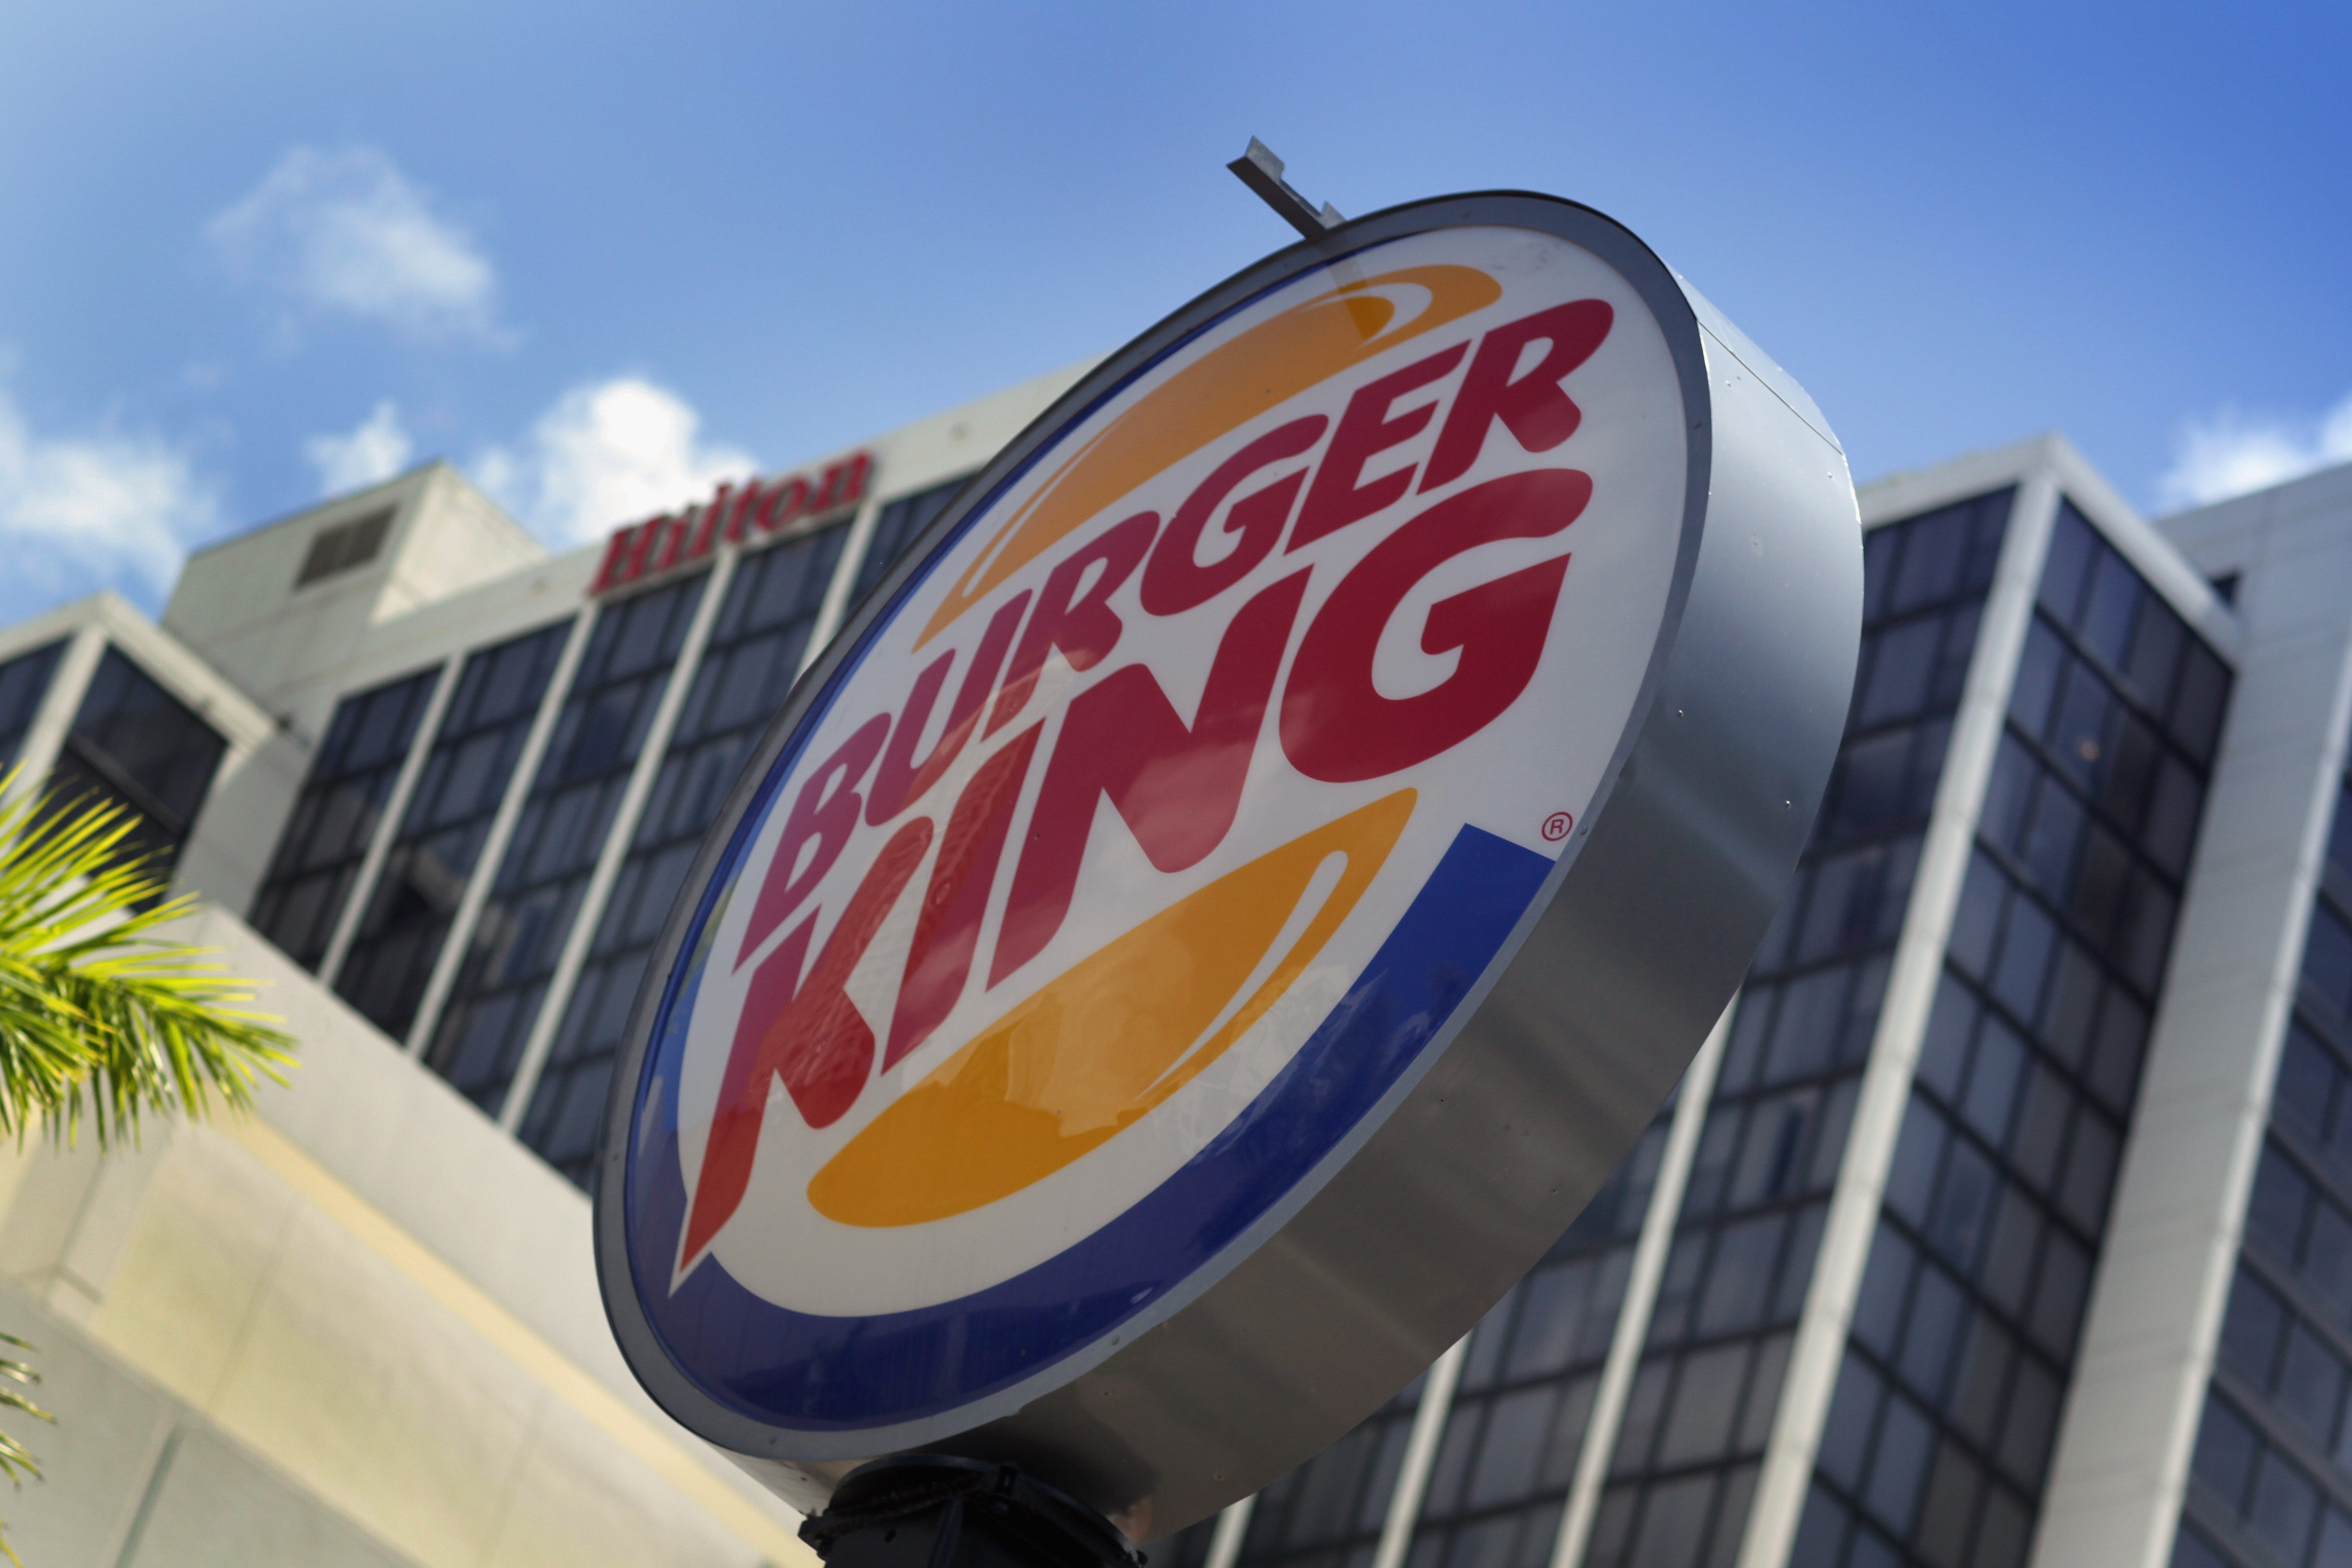 Burger King has launched its own cryptocurrency in Russia ...